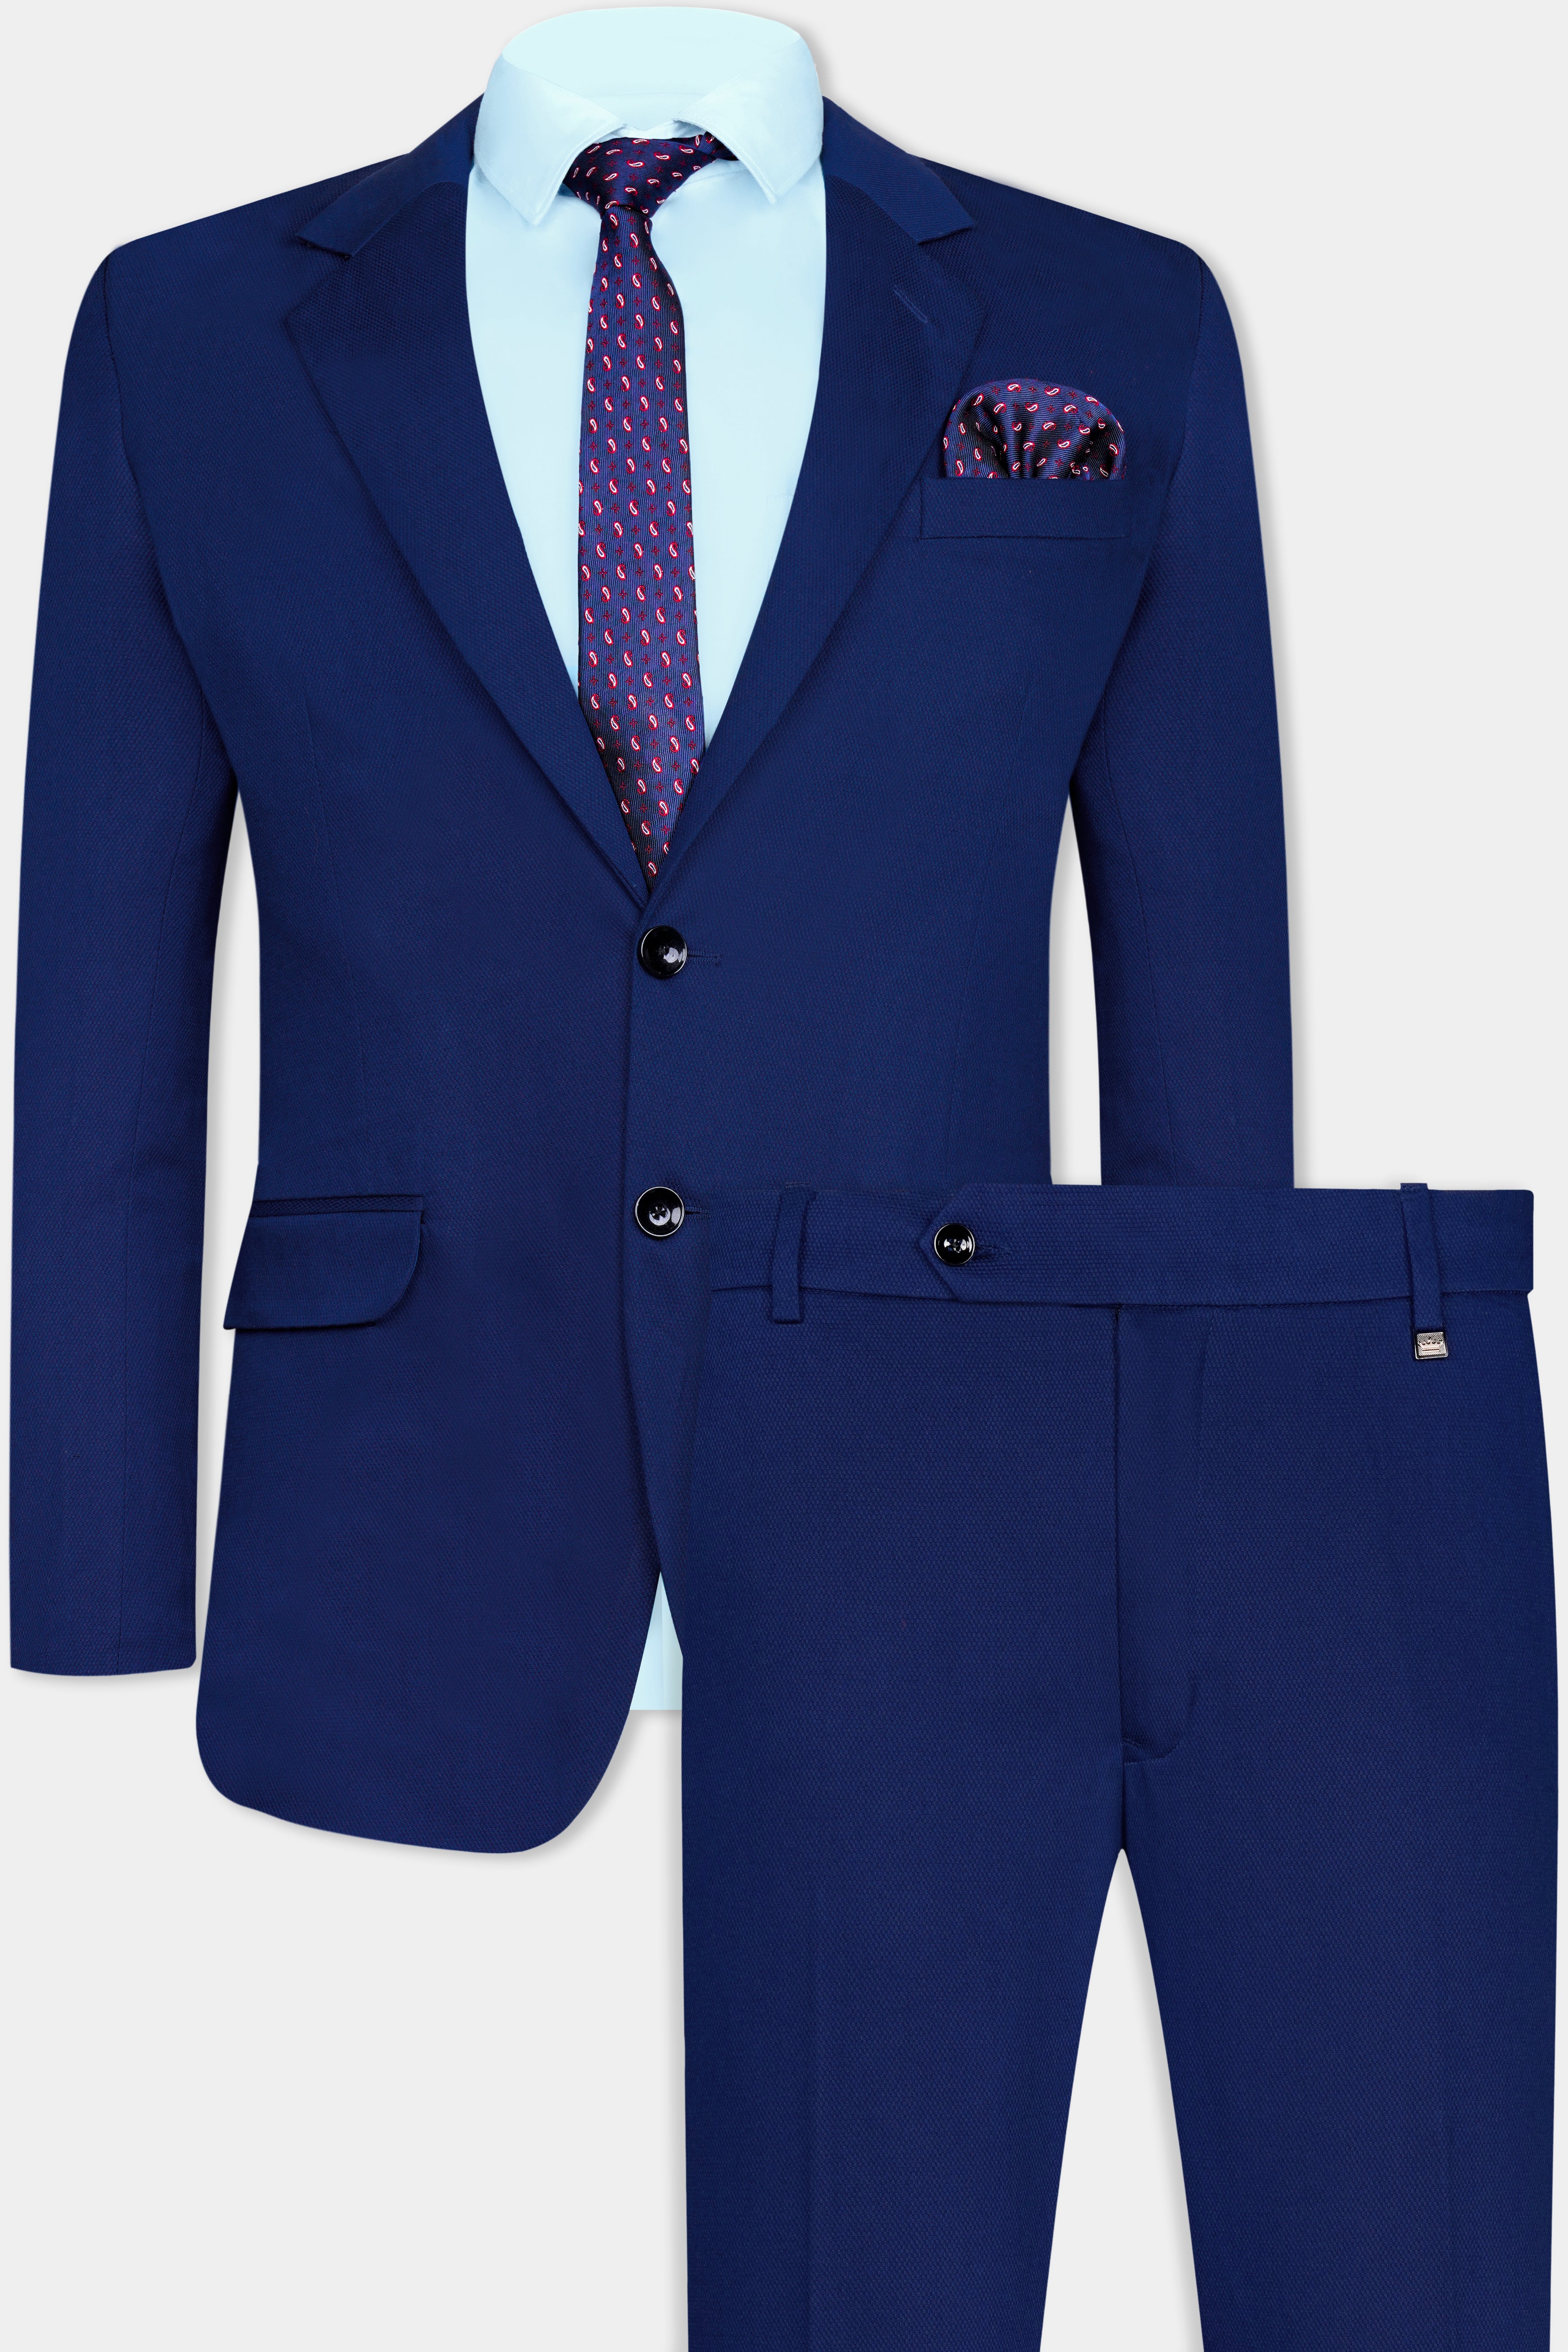 Downriver Blue Wool Rich Single Breasted Suit ST3056-SB-36, ST3056-SB-38, ST3056-SB-40, ST3056-SB-42, ST3056-SB-44, ST3056-SB-46, ST3056-SB-48, ST3056-SB-50, ST3056-SB-52, ST3056-SB-54, ST3056-SB-56, ST3056-SB-58, ST3056-SB-60